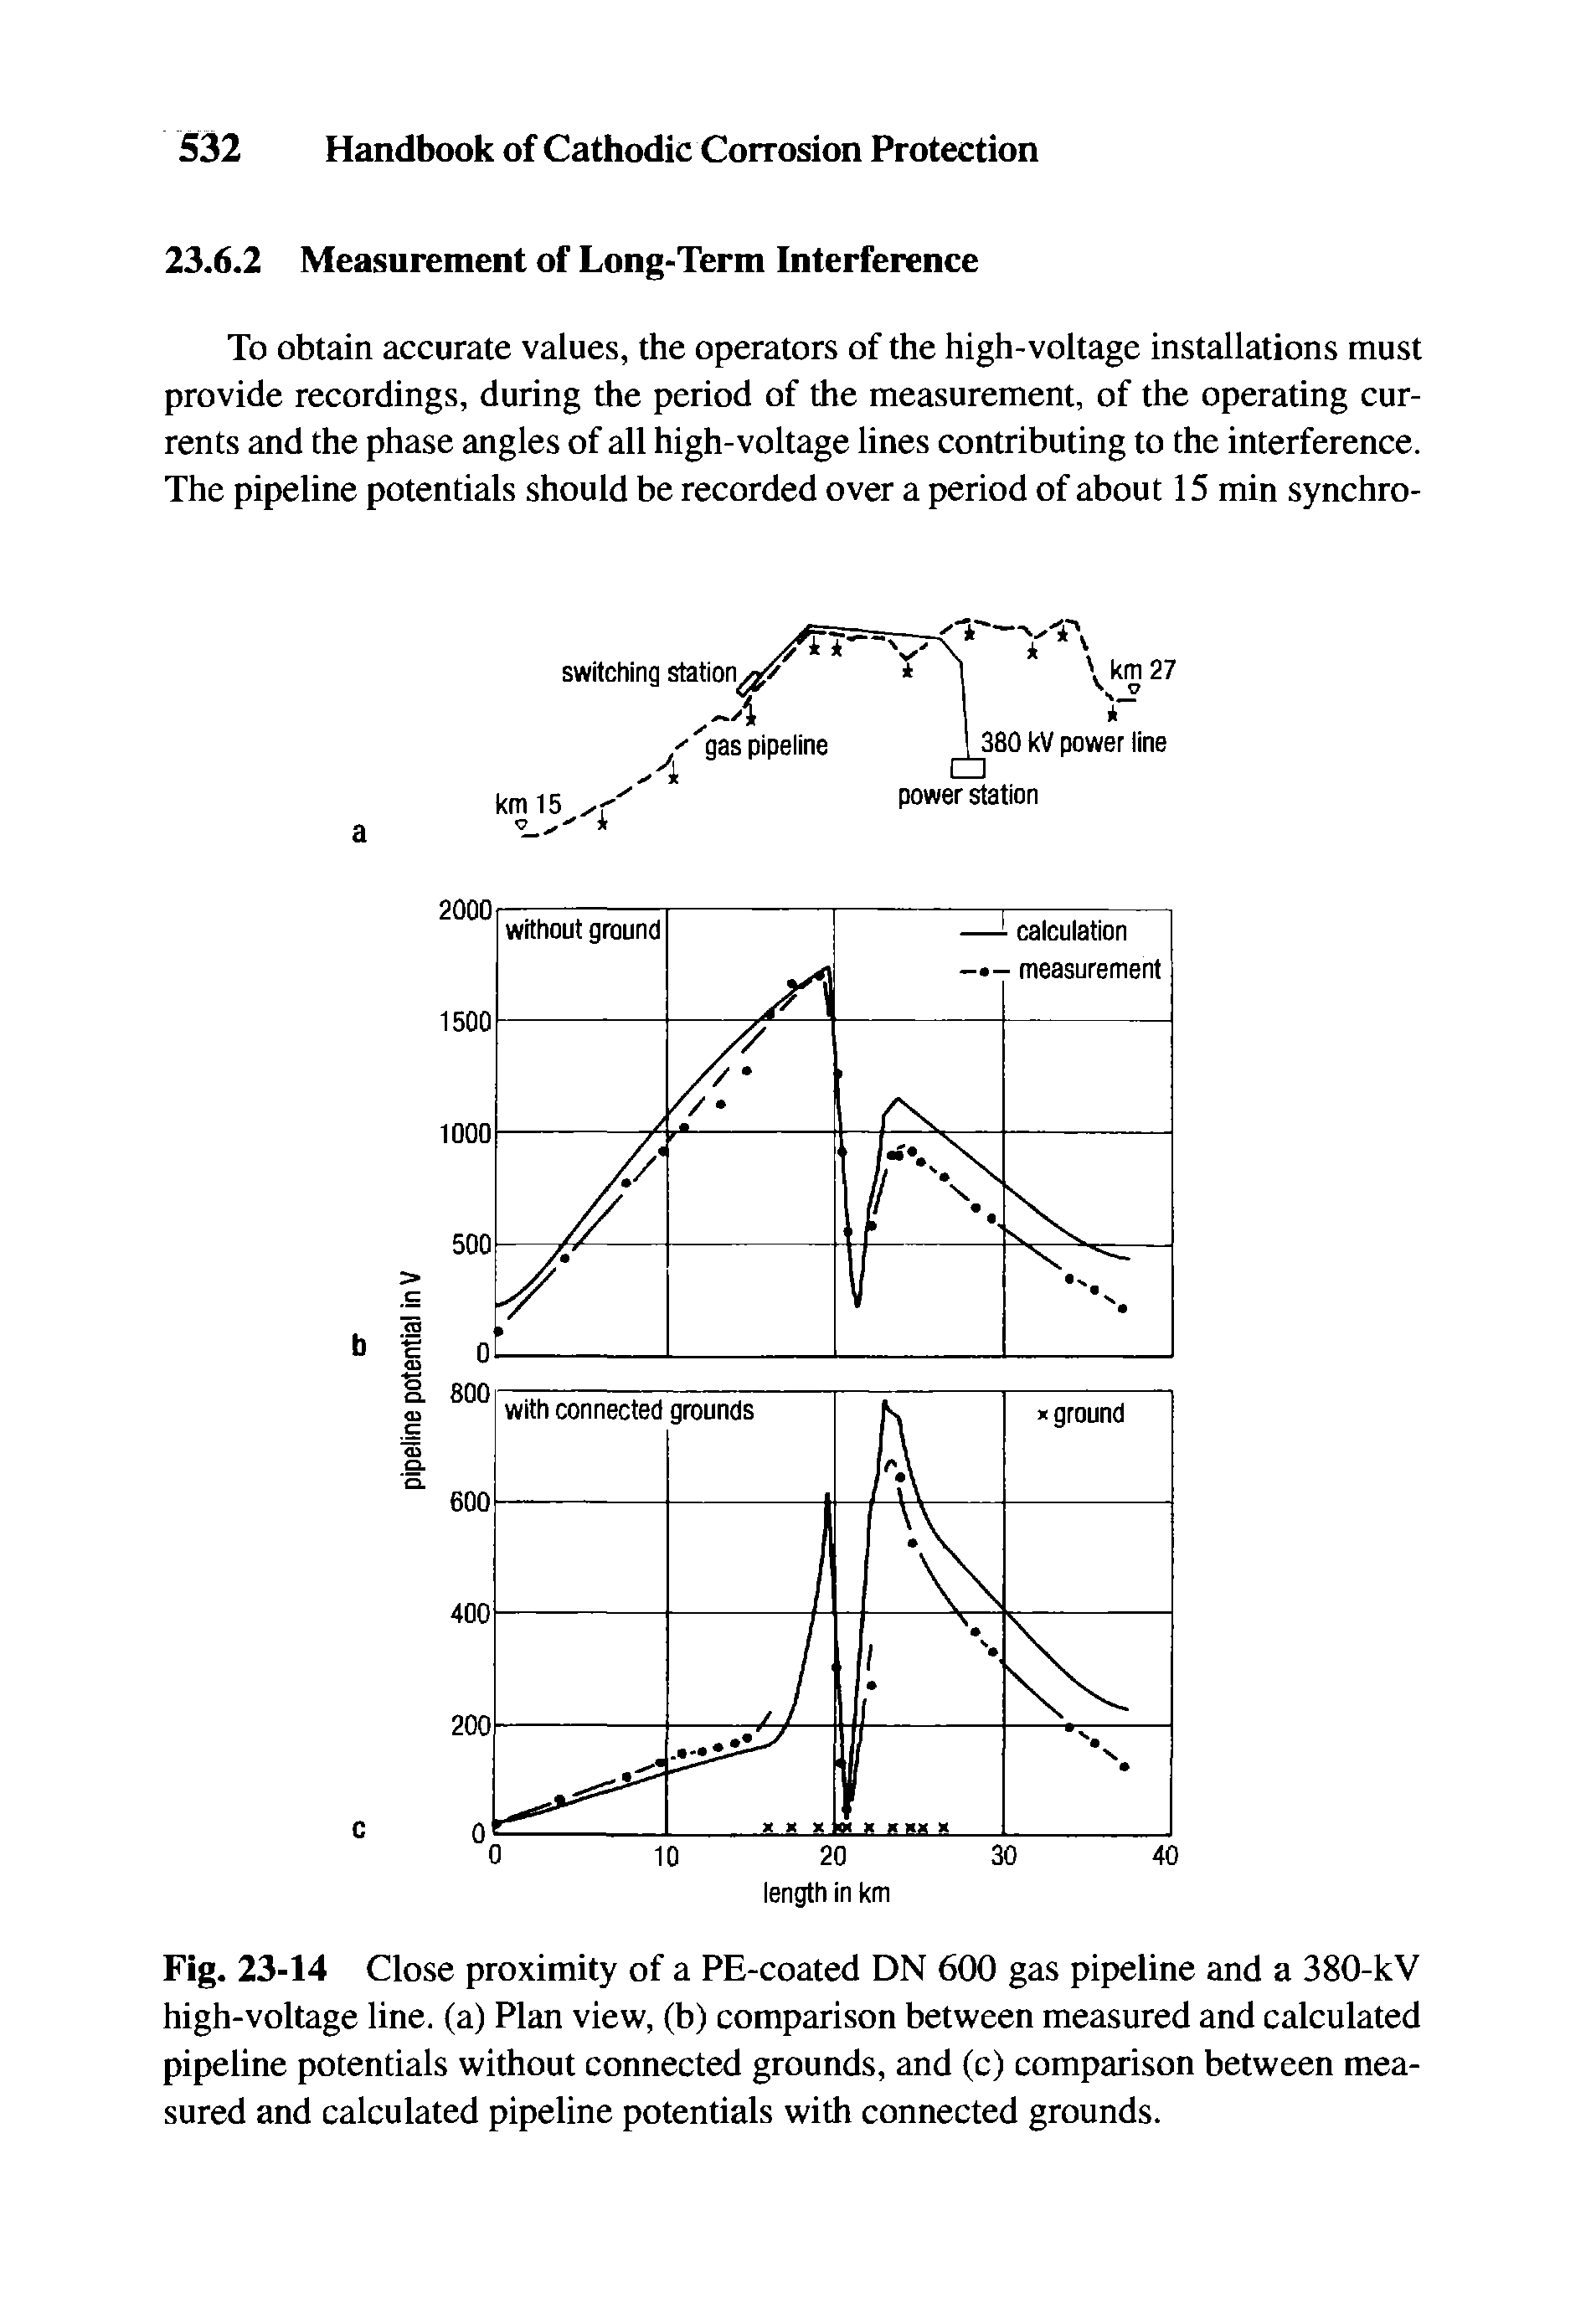 Fig. 23-14 Close proximity of a PE-coated DN 600 gas pipeline and a 380-kV high-voltage line, (a) Plan view, (b) comparison between measured and calculated pipeline potentials without connected grounds, and (c) comparison between measured and calculated pipeline potentials with connected grounds.